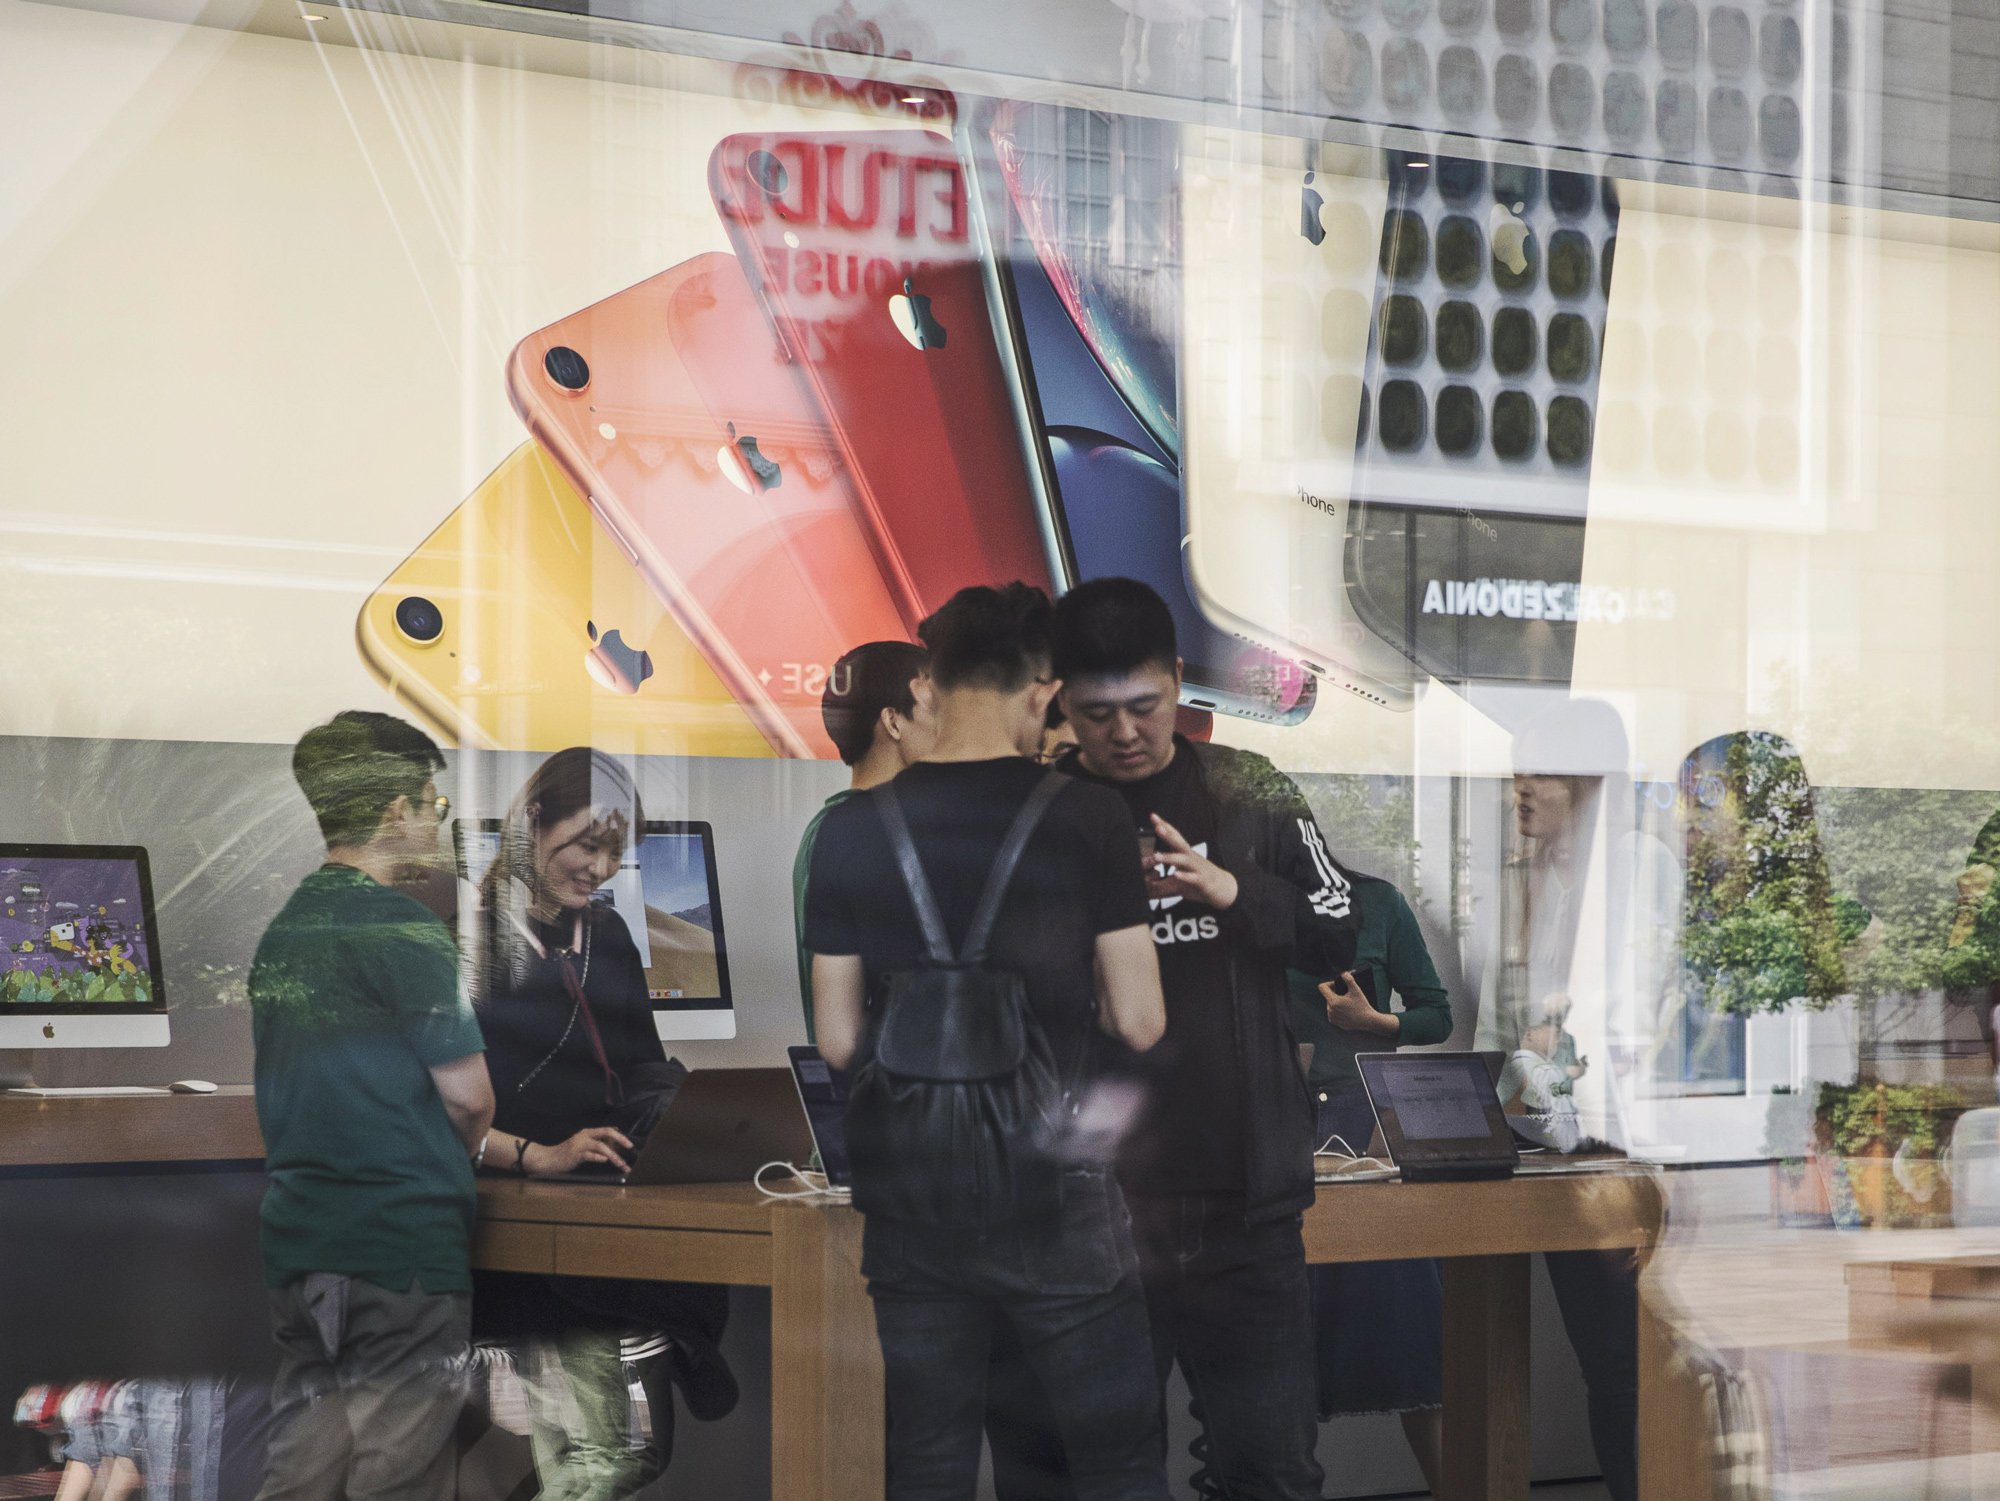 Customers browse products inside an Apple Inc. store in Shanghai.